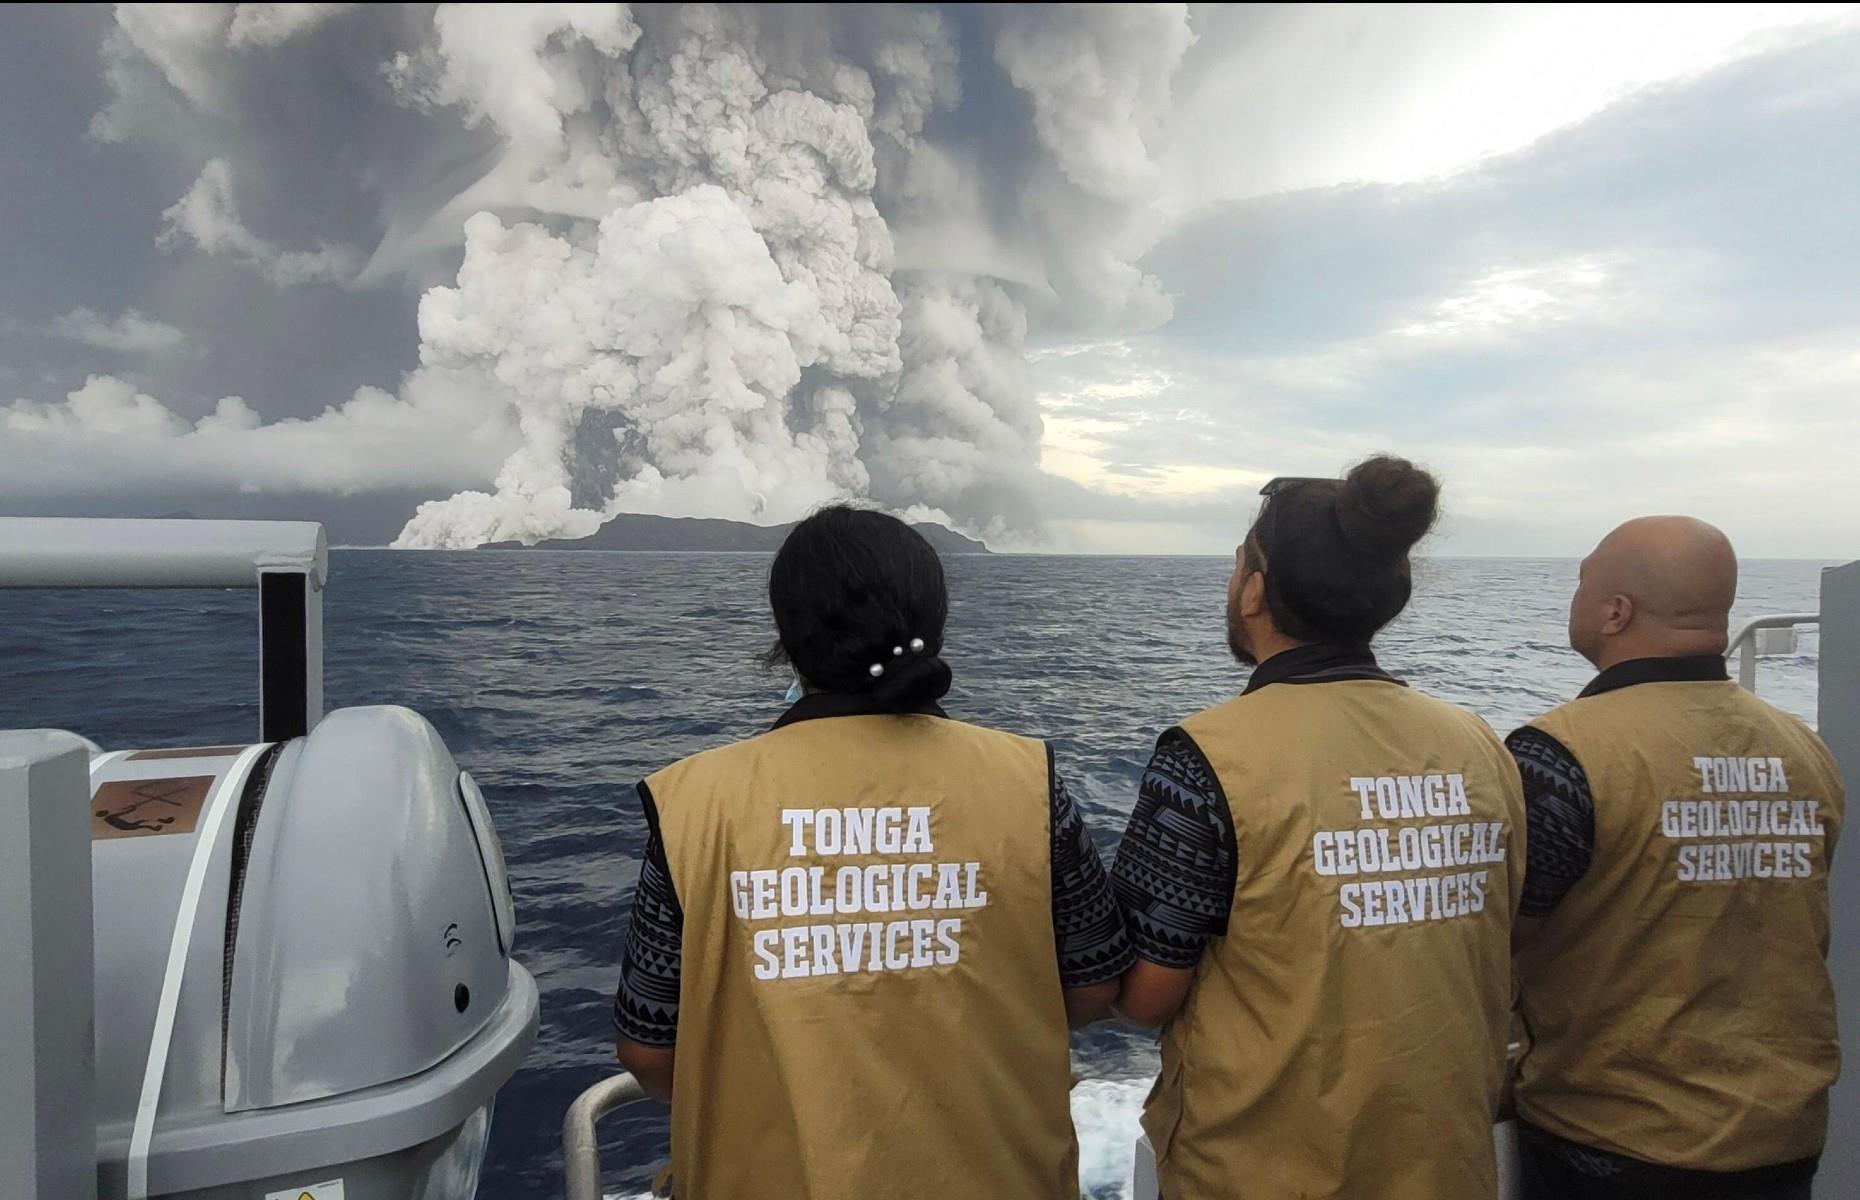 <p>Tonga Geological Services had been observing and monitoring Hunga Tonga–Hunga Ha‘apai since the eruption began on 20 December 2021, but it wasn't until 15 January 2022 that the climatic blast came, causing probably <a href="https://en.wikipedia.org/wiki/2022_Hunga_Tonga_eruption_and_tsunami#Tsunami">the largest volcanic eruption in the 21st century</a>. It triggered tsunamis in Tonga, Fiji, Samoa, Vanuatu, New Zealand, Japan, the US and South America. At least three people are known to have died and the island was left cut off from the world for more than a week.</p>